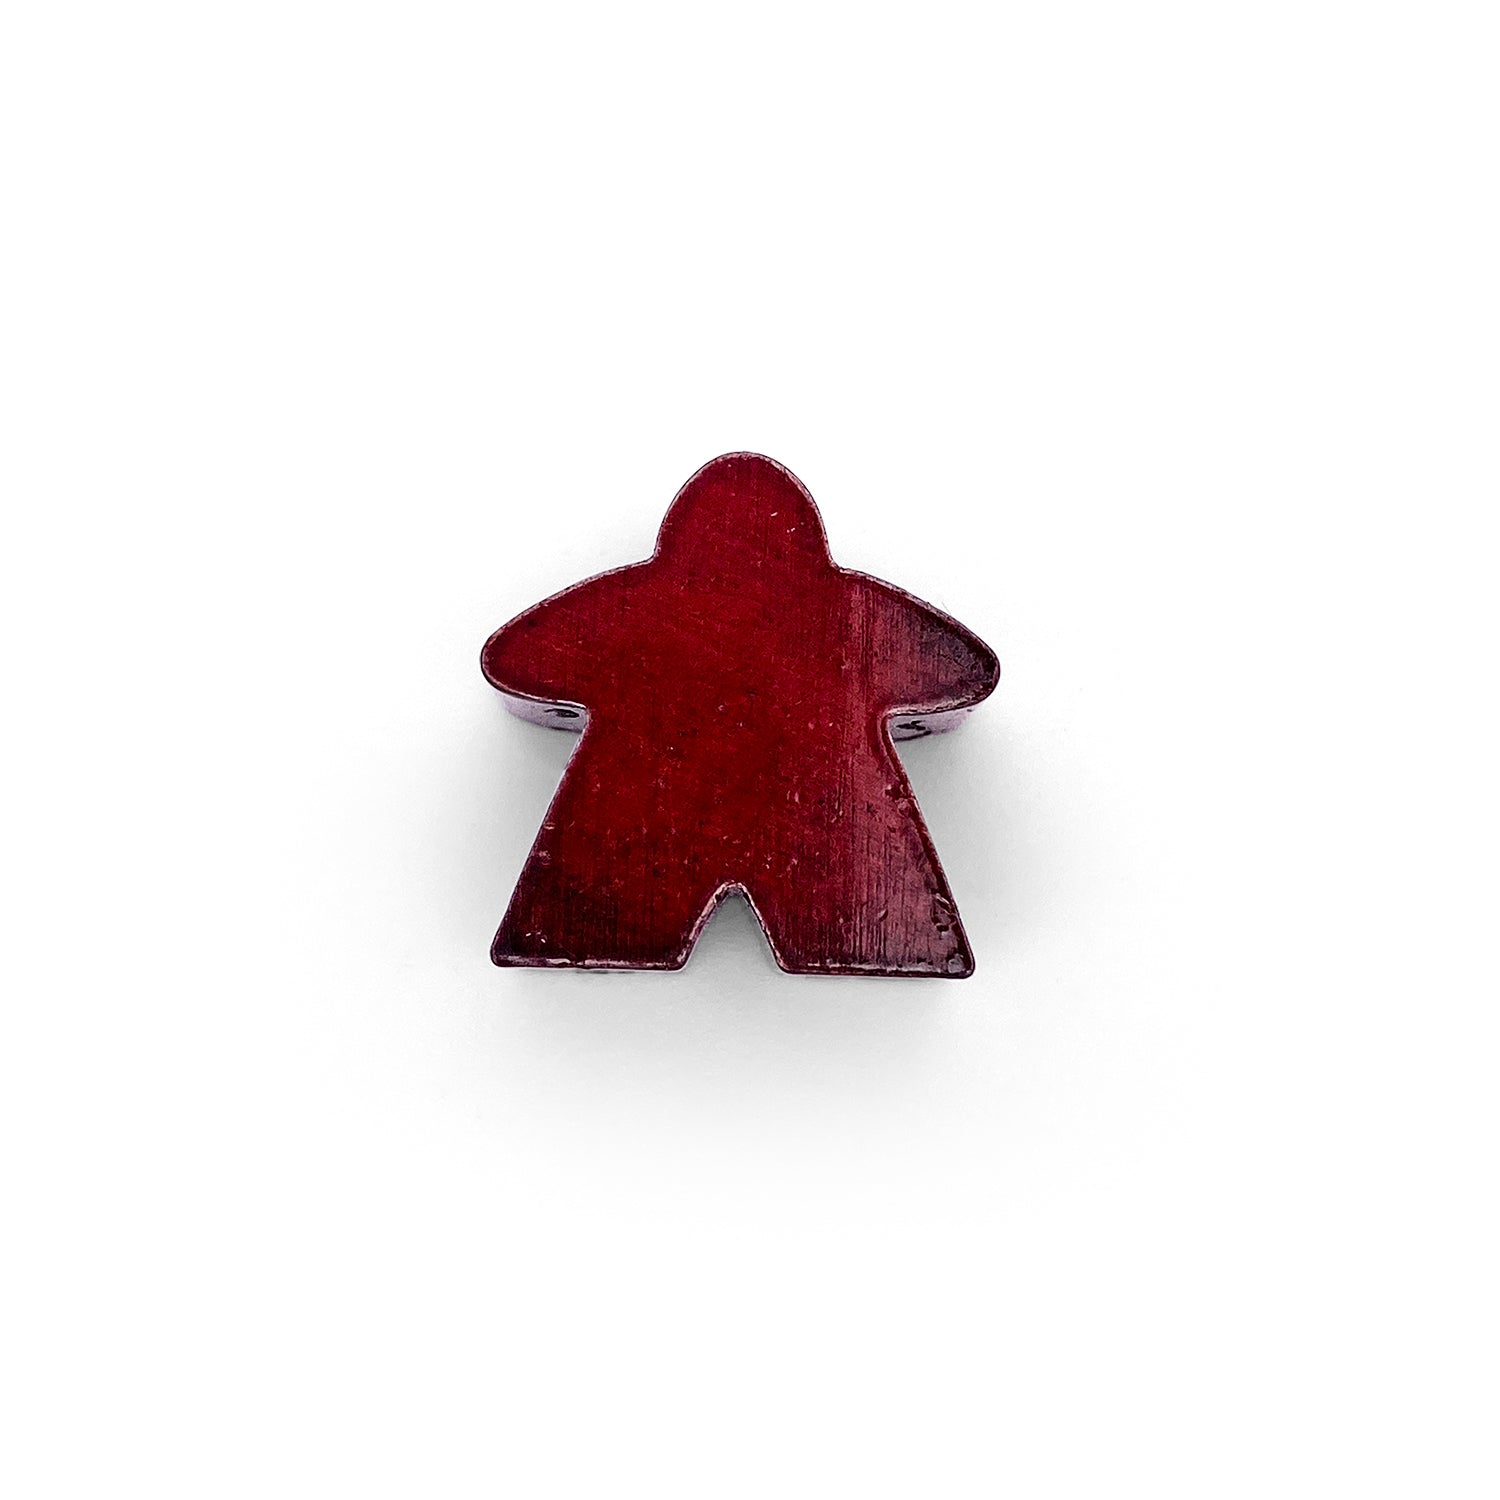 8 Pack of Red Enamel Meeples by Norse Foundry